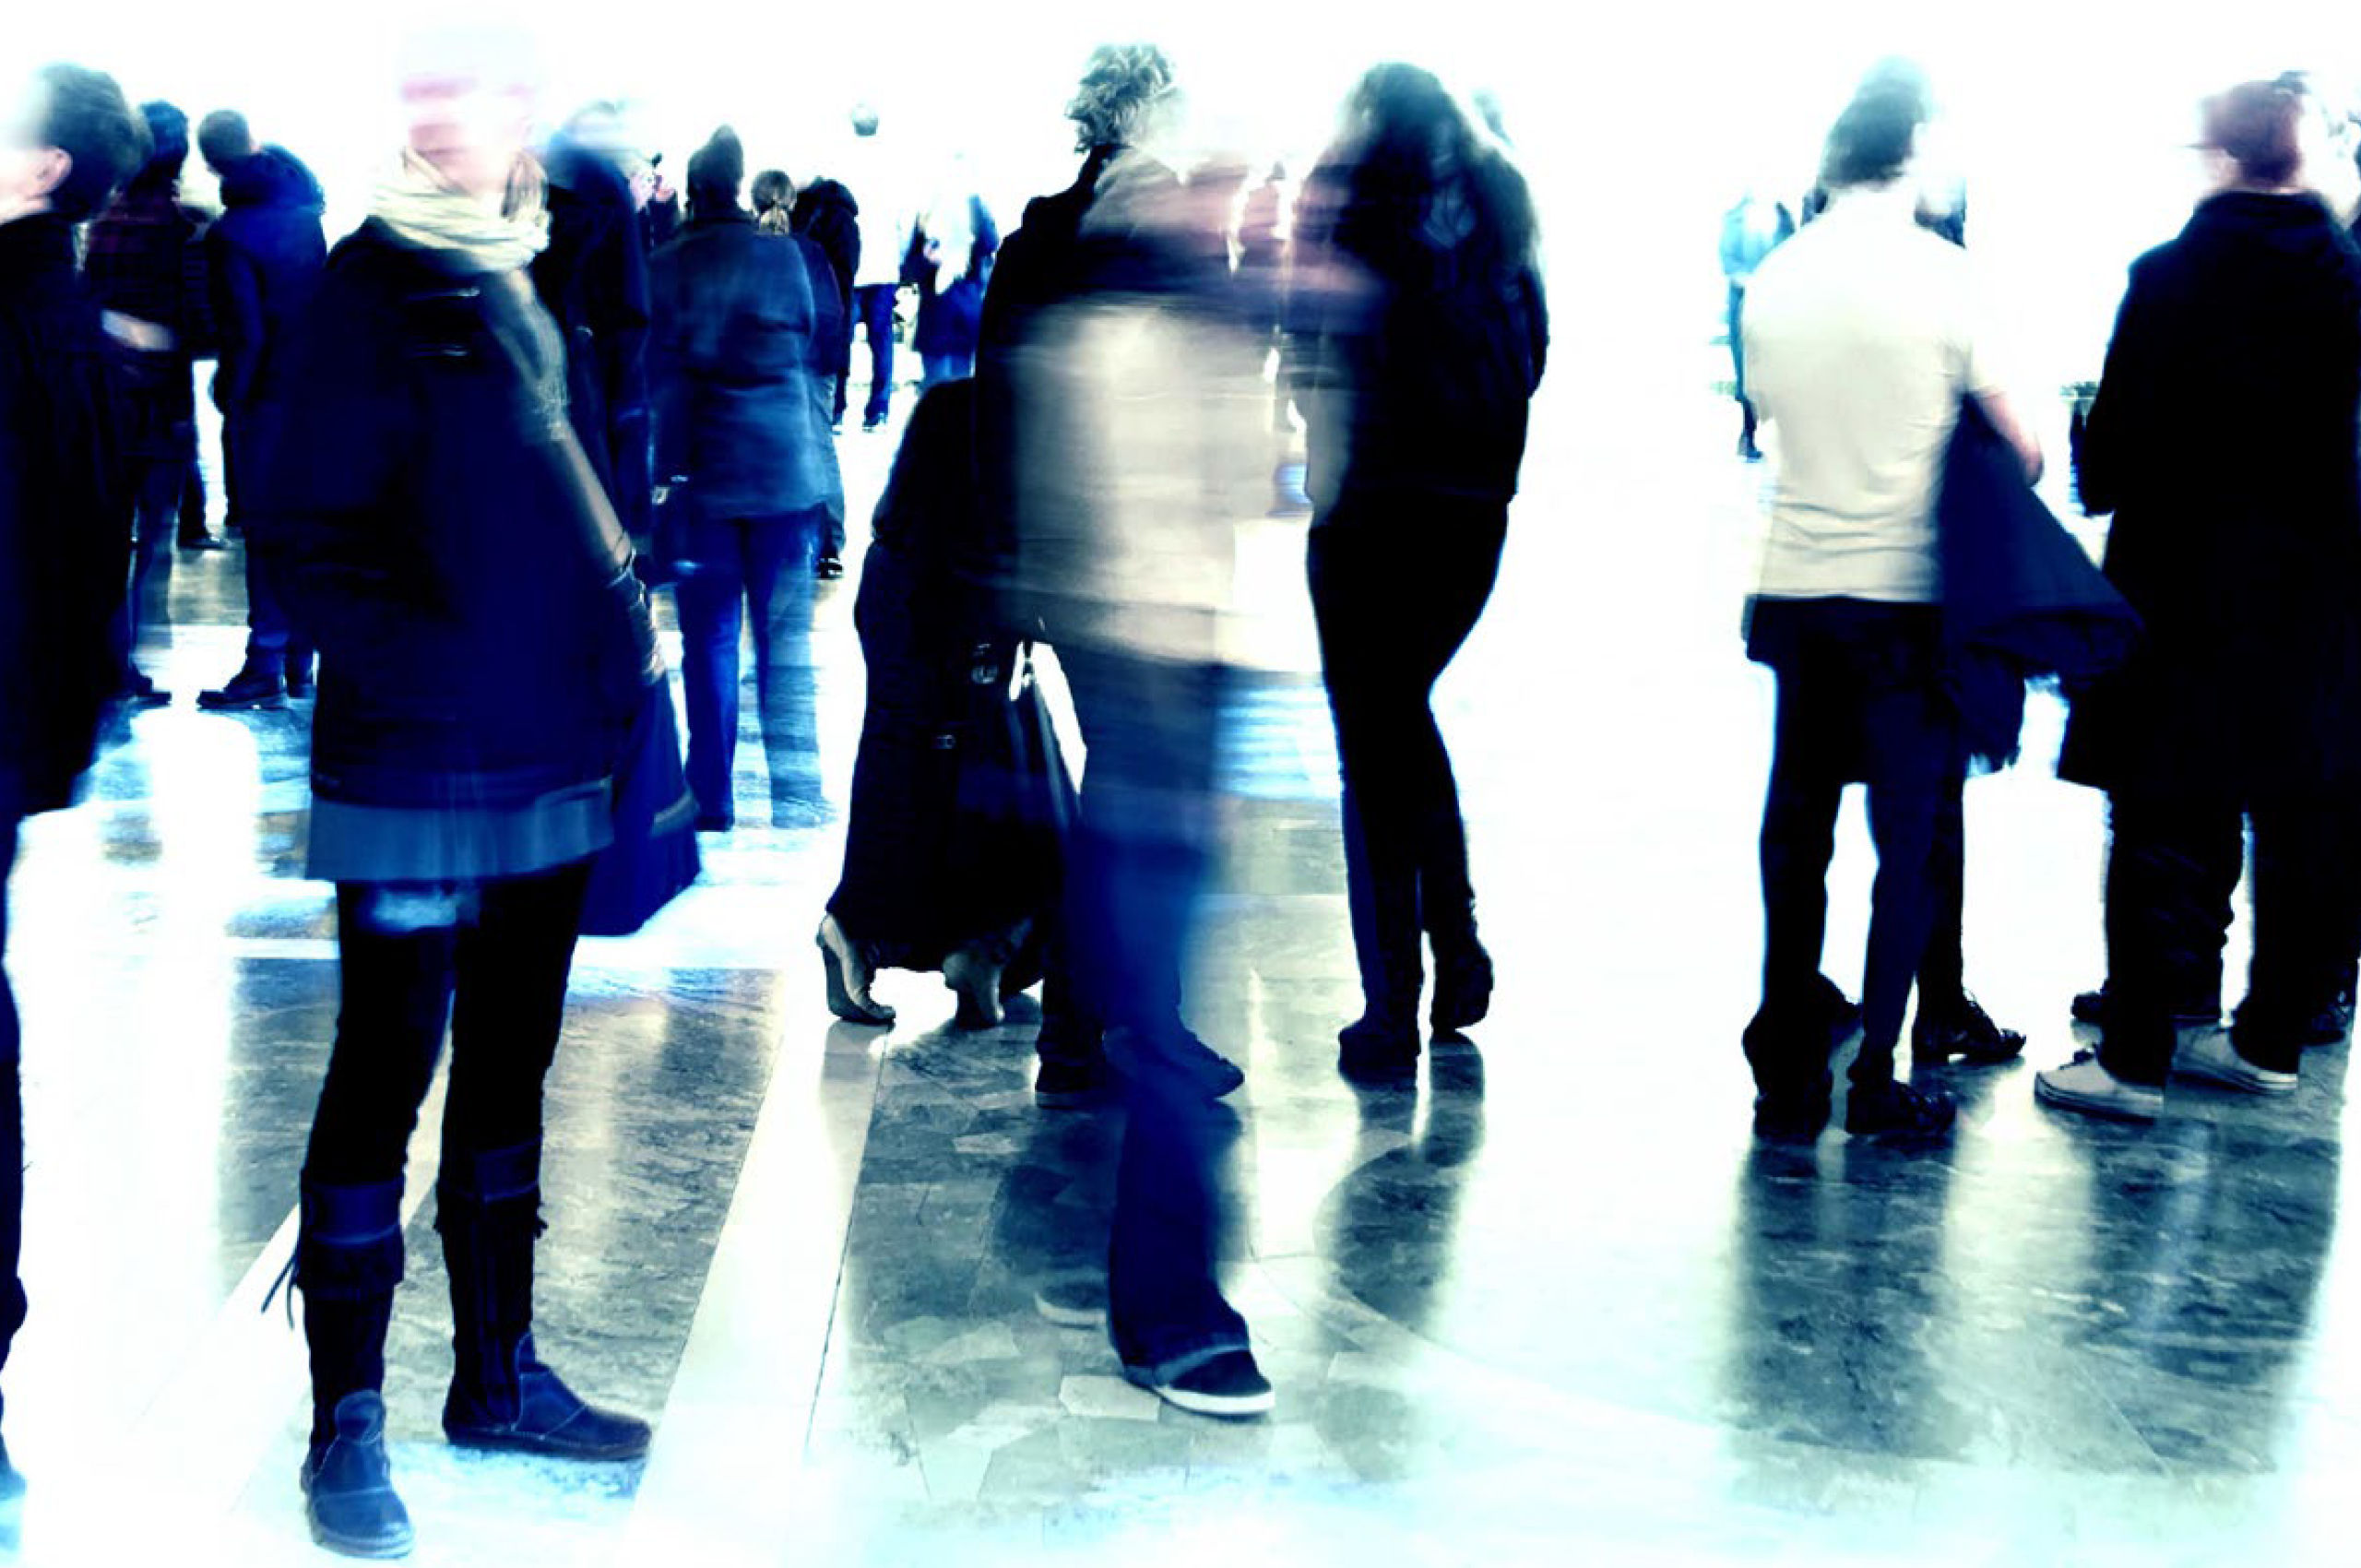 Over-exposed, blurred image of people standing and walking in a large public area